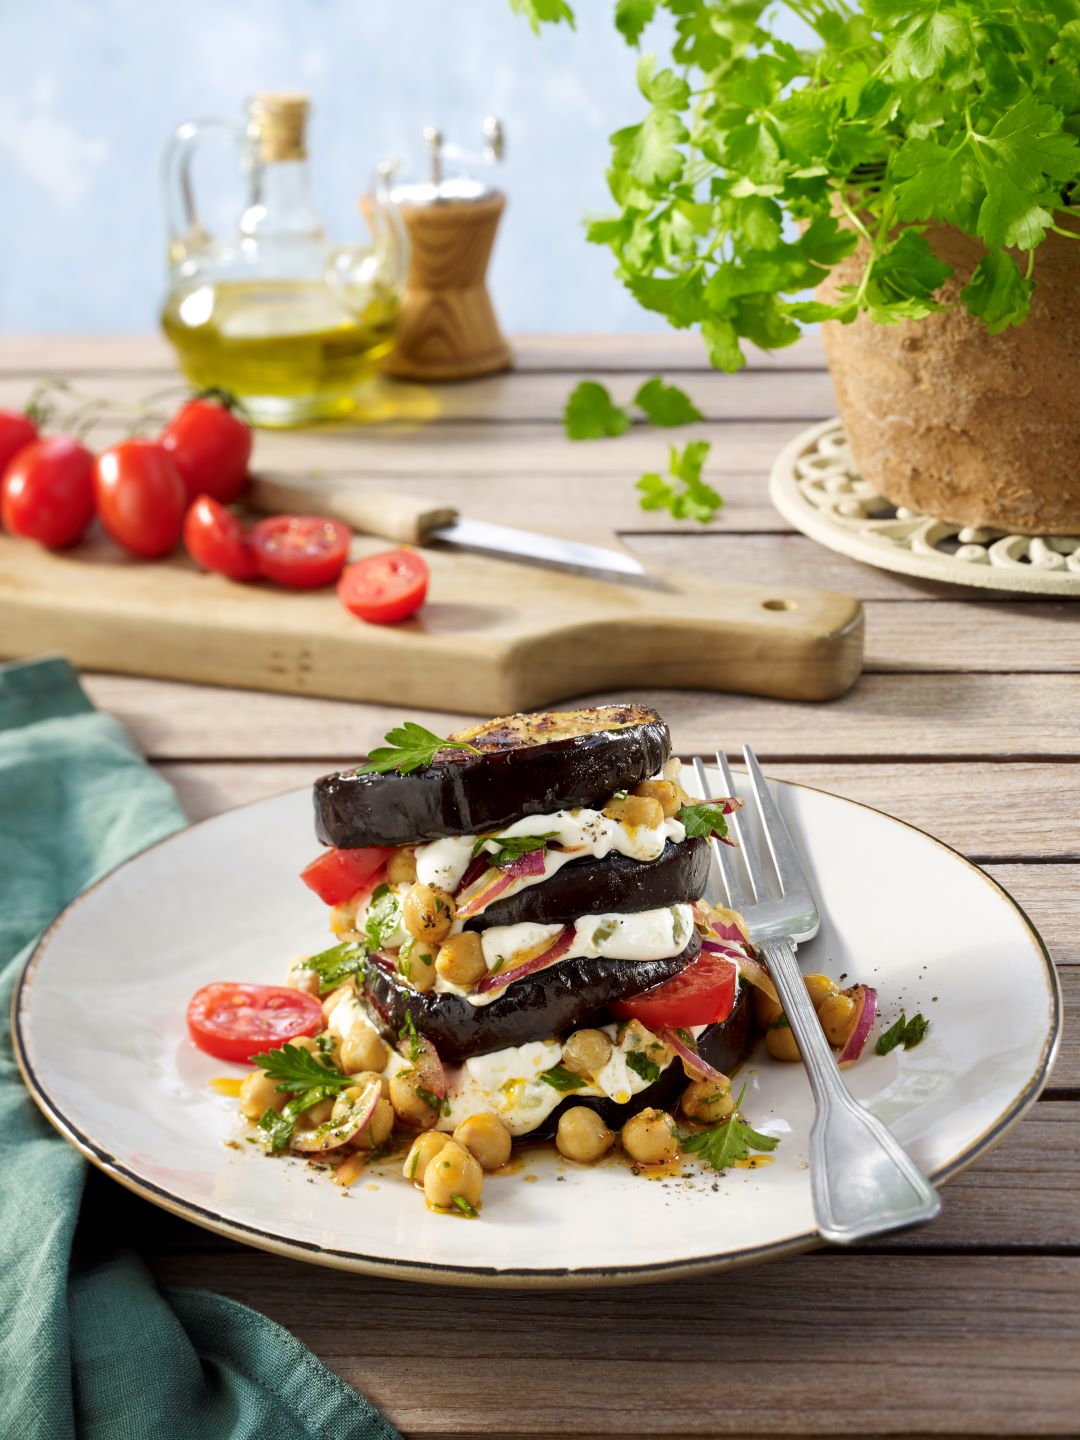 Eggplant Towers with Chickpeas